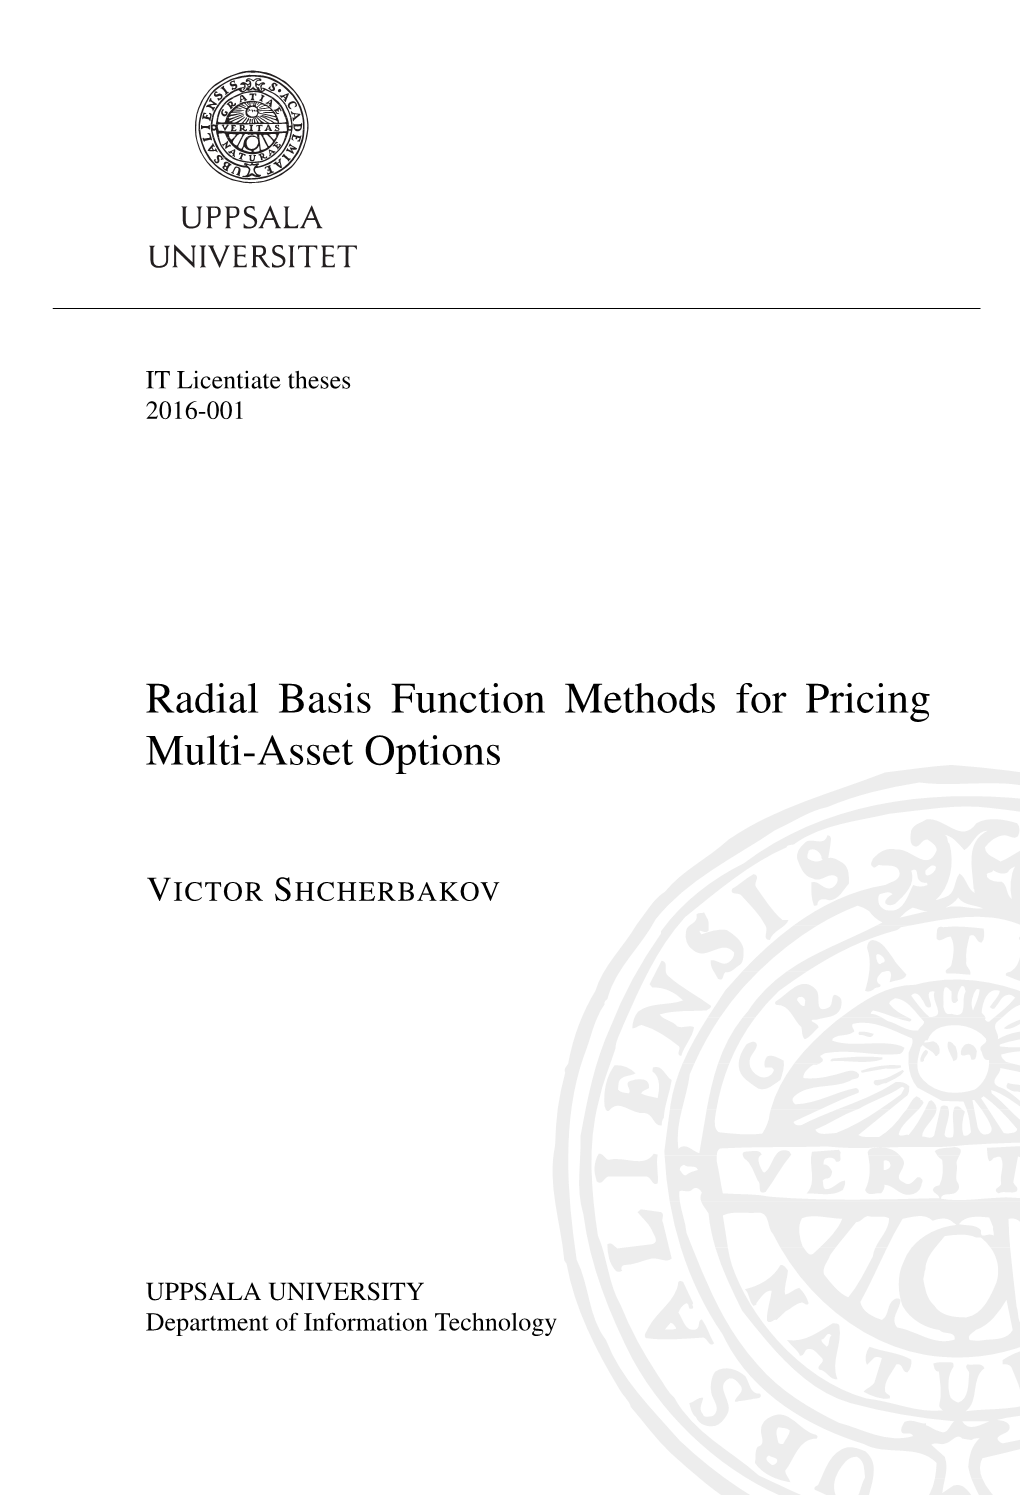 Radial Basis Function Methods for Pricing Multi-Asset Options